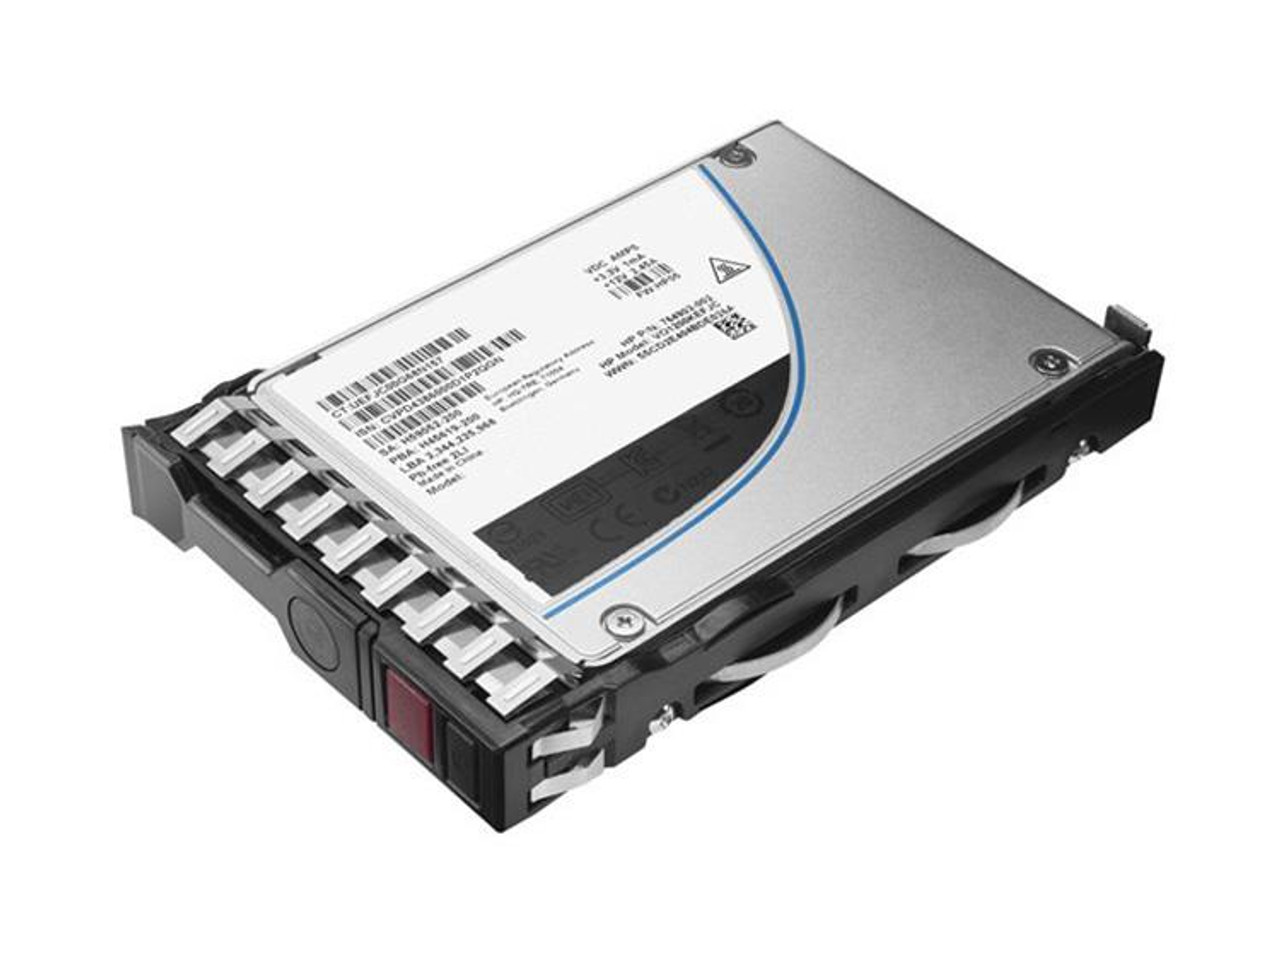 P06198-B21 HPE 1.92TB eTLC SATA 6Gbps Hot Swap Read Intensive 2.5-inch Internal Solid State Drive (SSD) with Smart Carrier